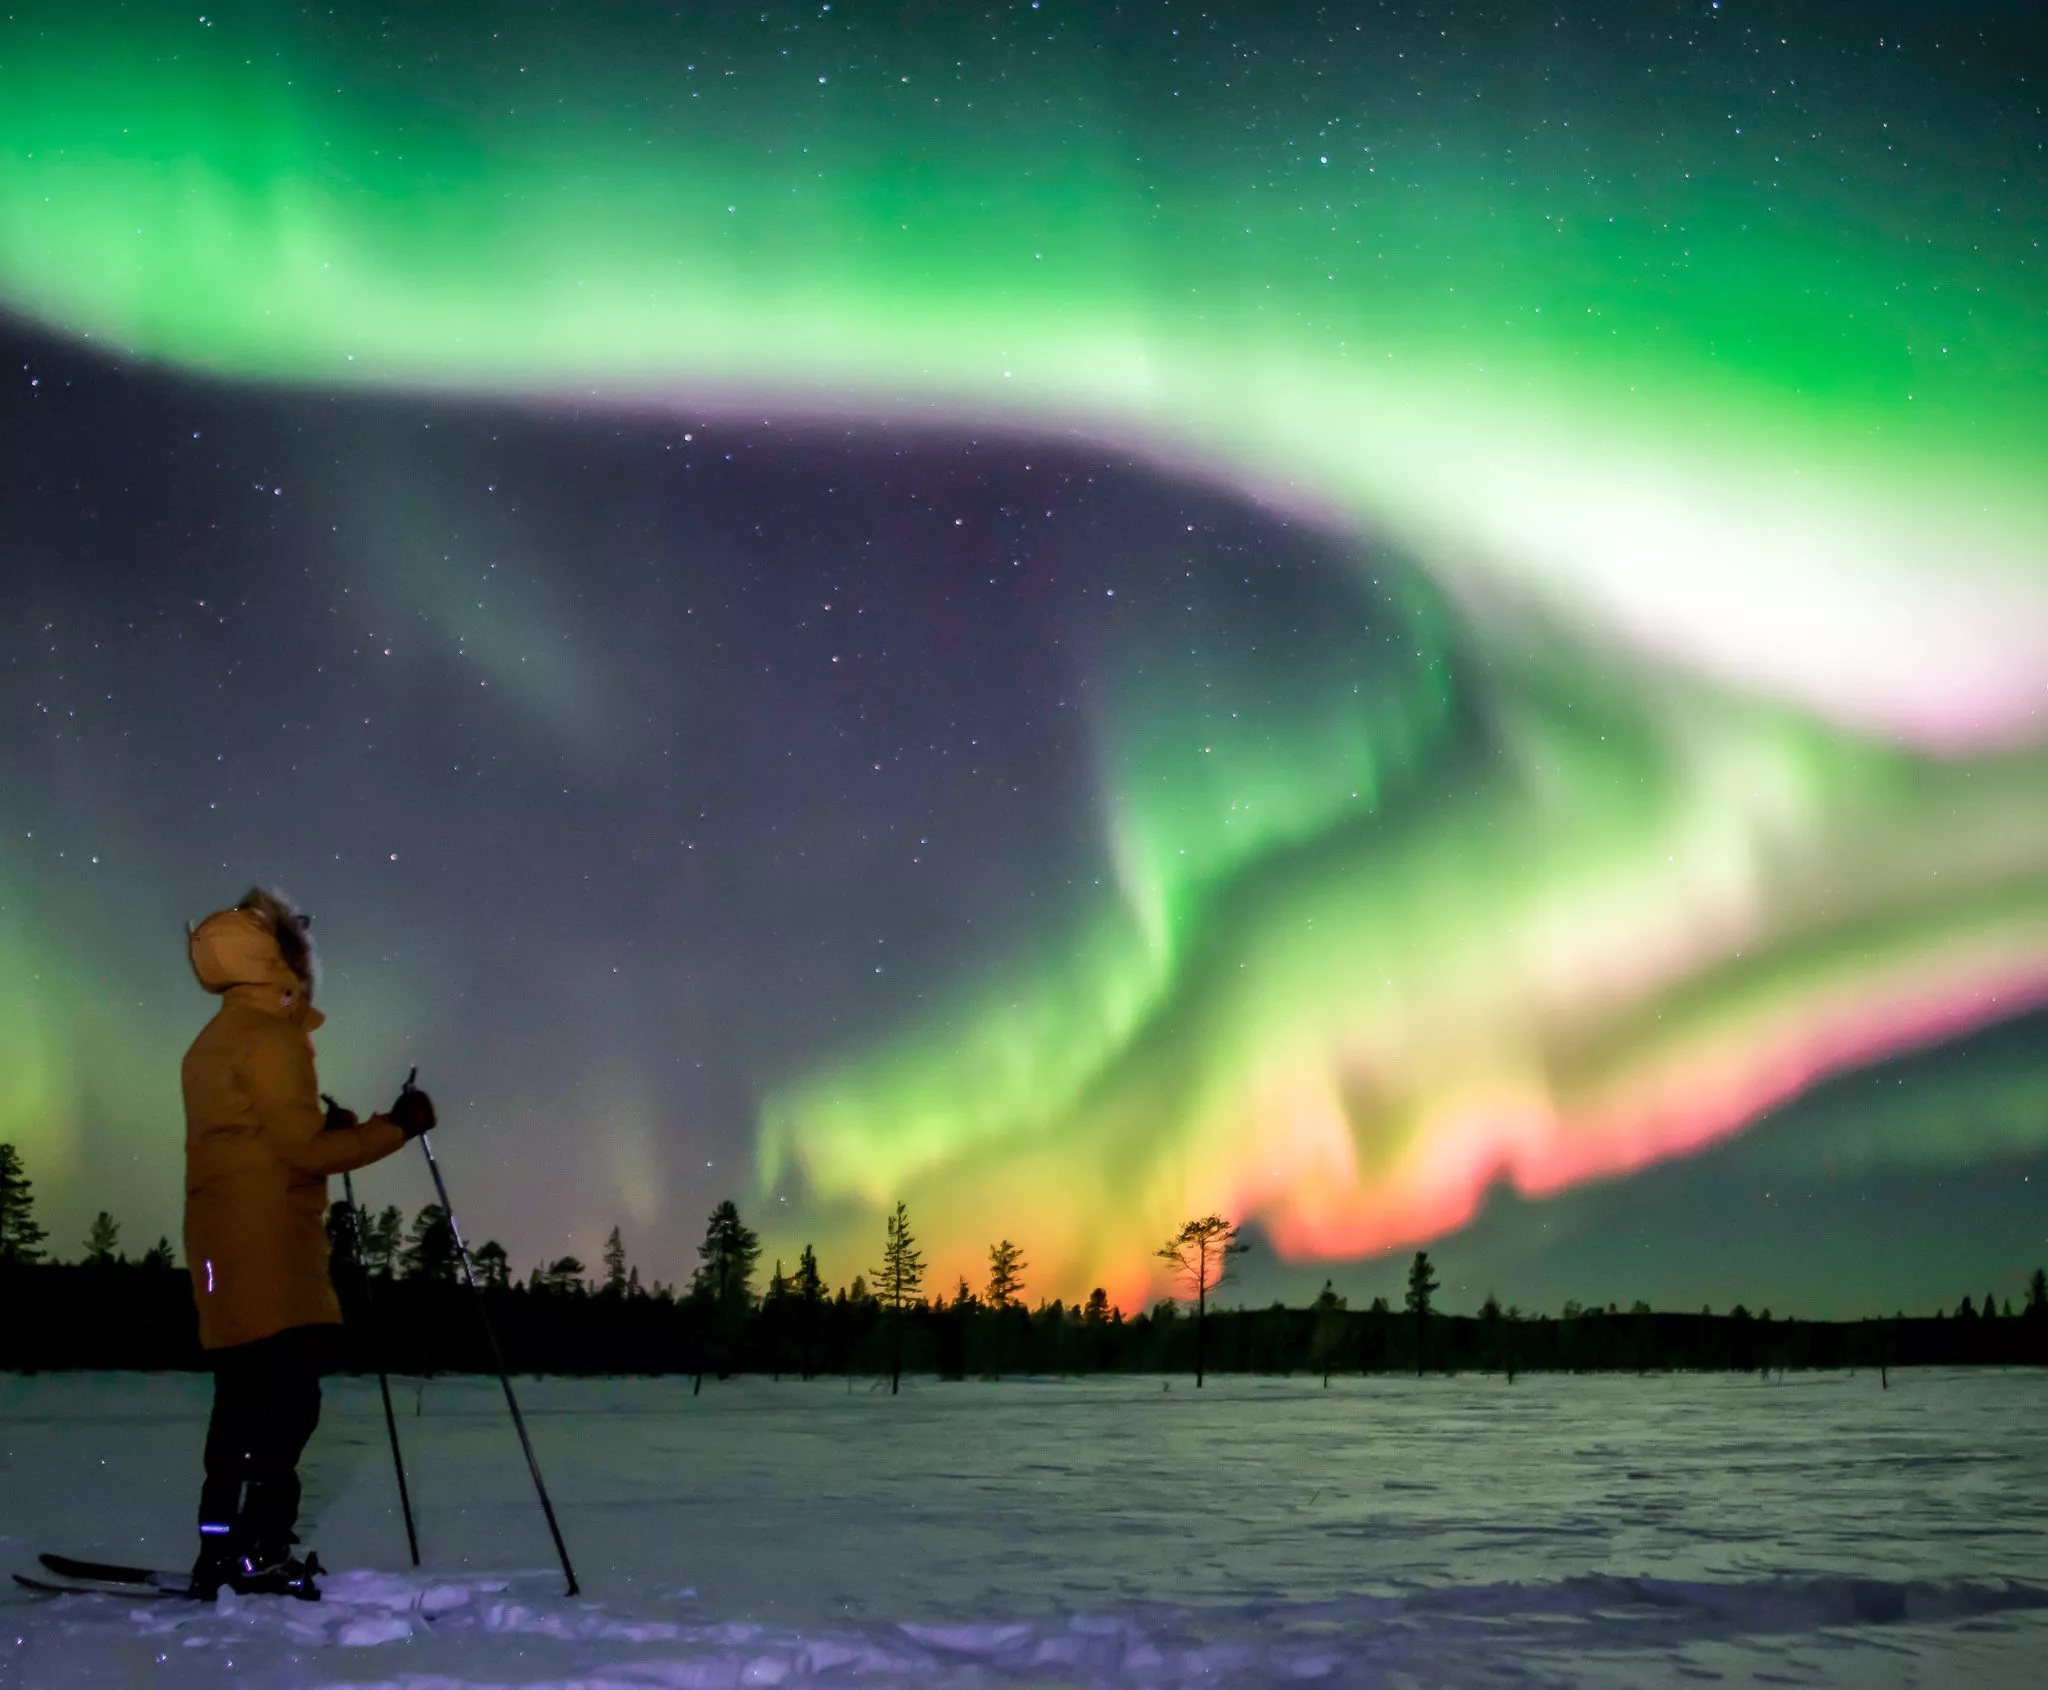 Wildmaker Lapland in Finland, Europe | Excursions - Rated 1